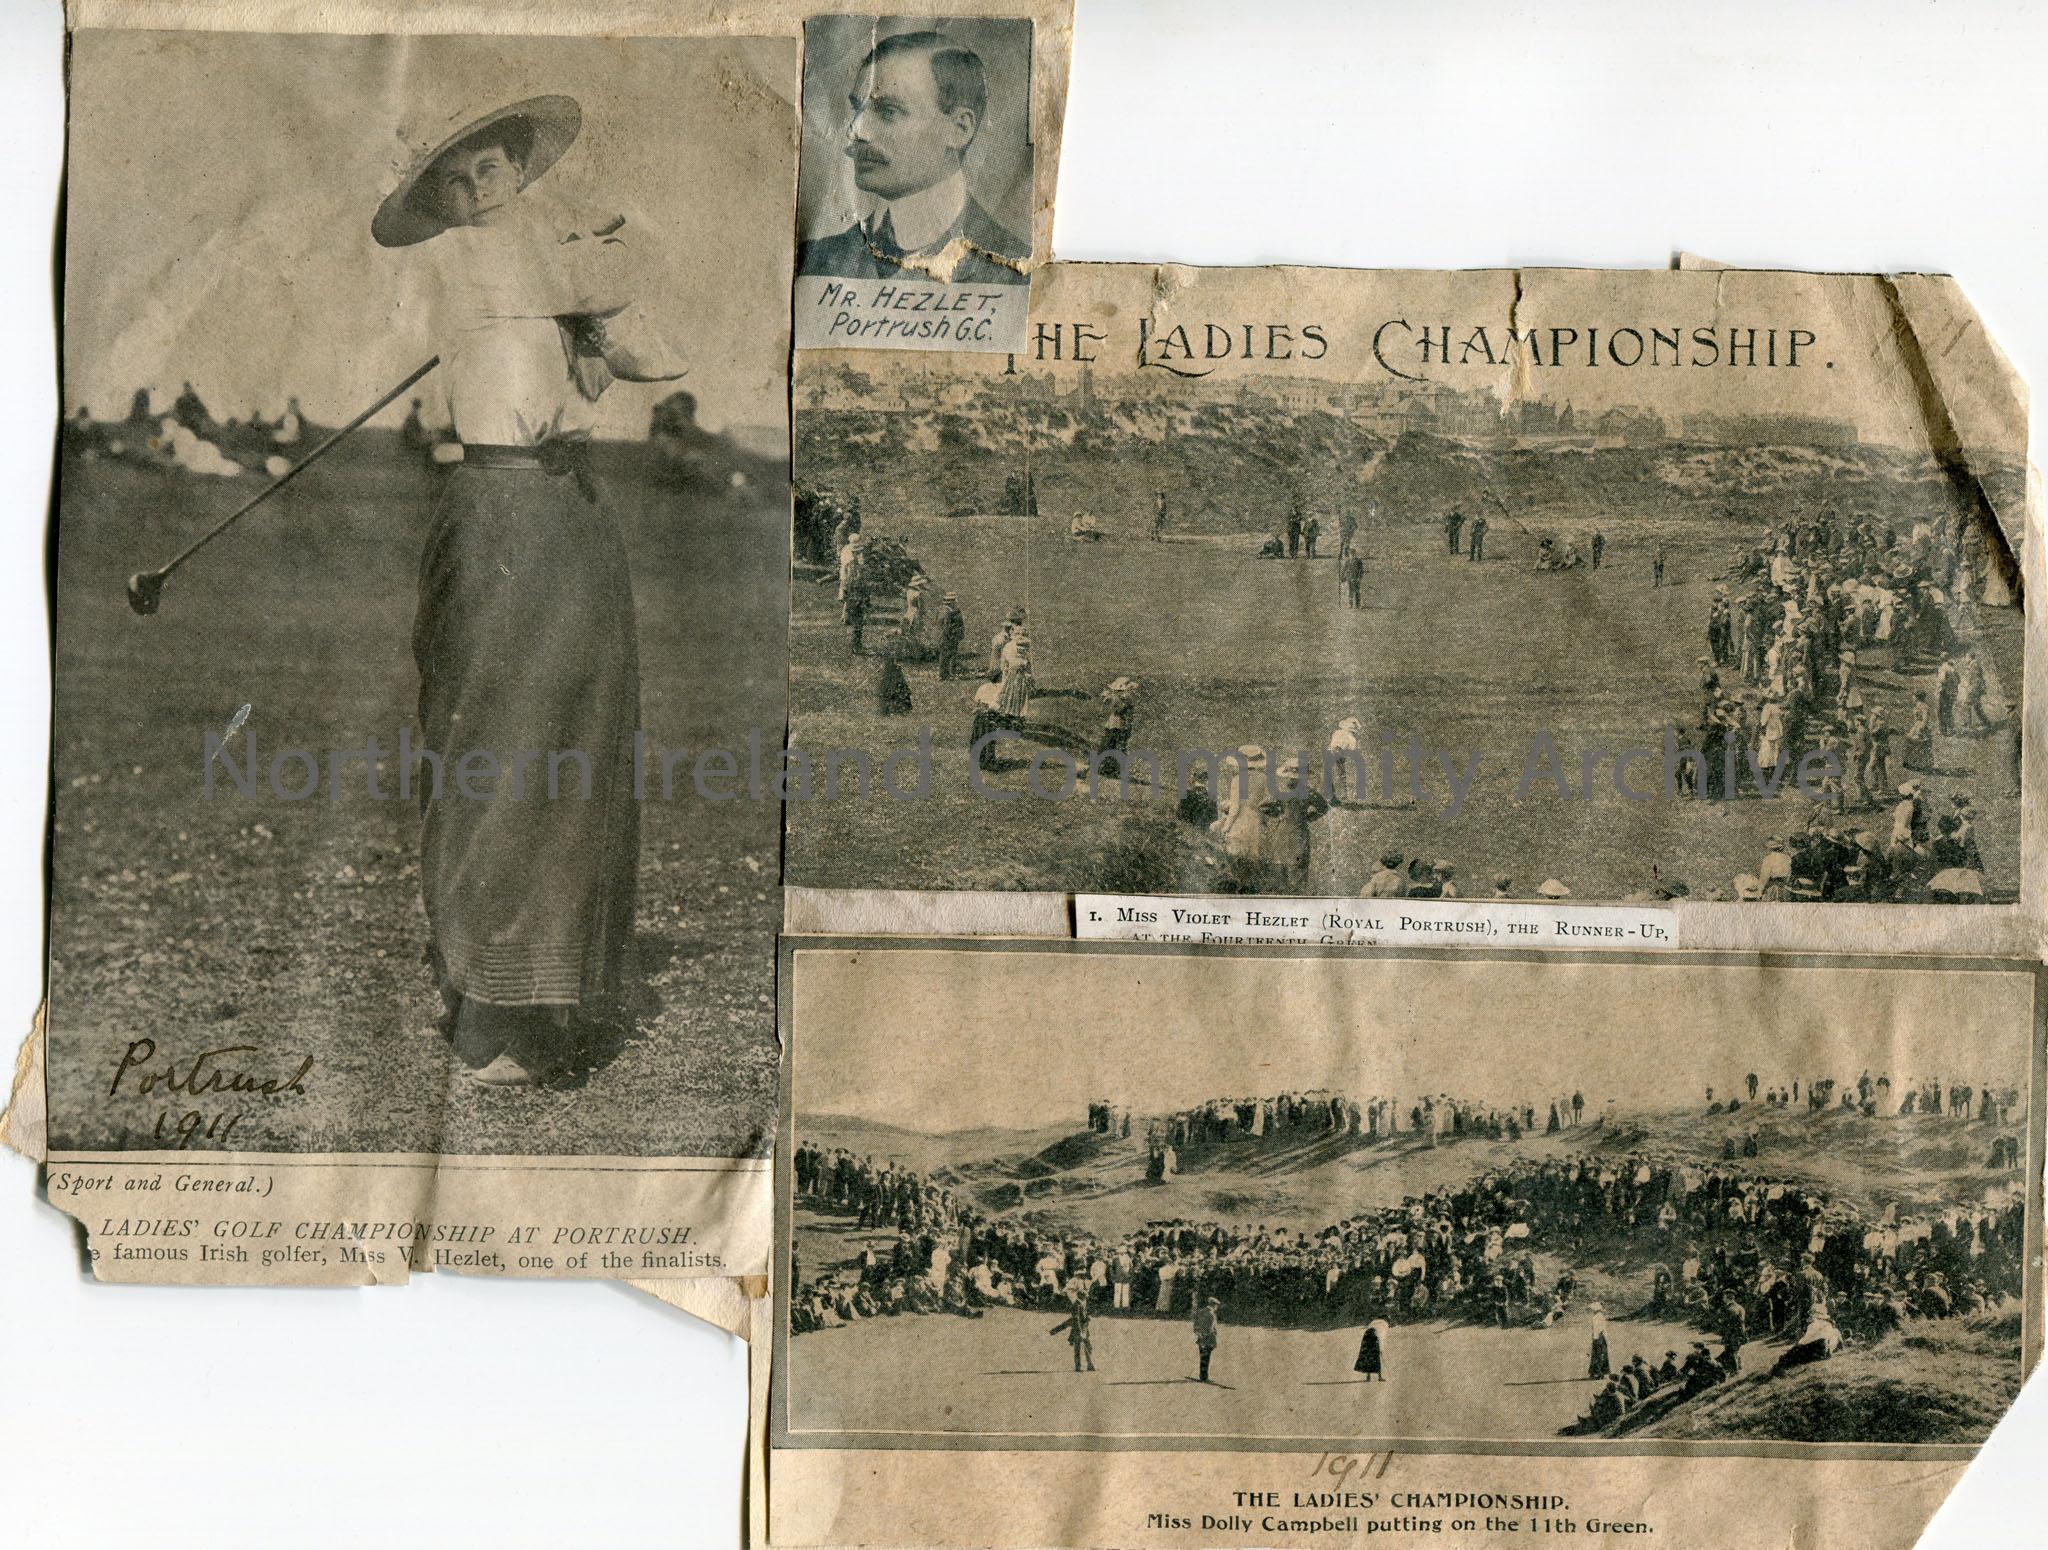 Copies of four images, possibly from a newspaper re ‘The Ladies’ Championship’. Portrush 1911 handwritten on image of Miss V. Hezlet. Other images cap…